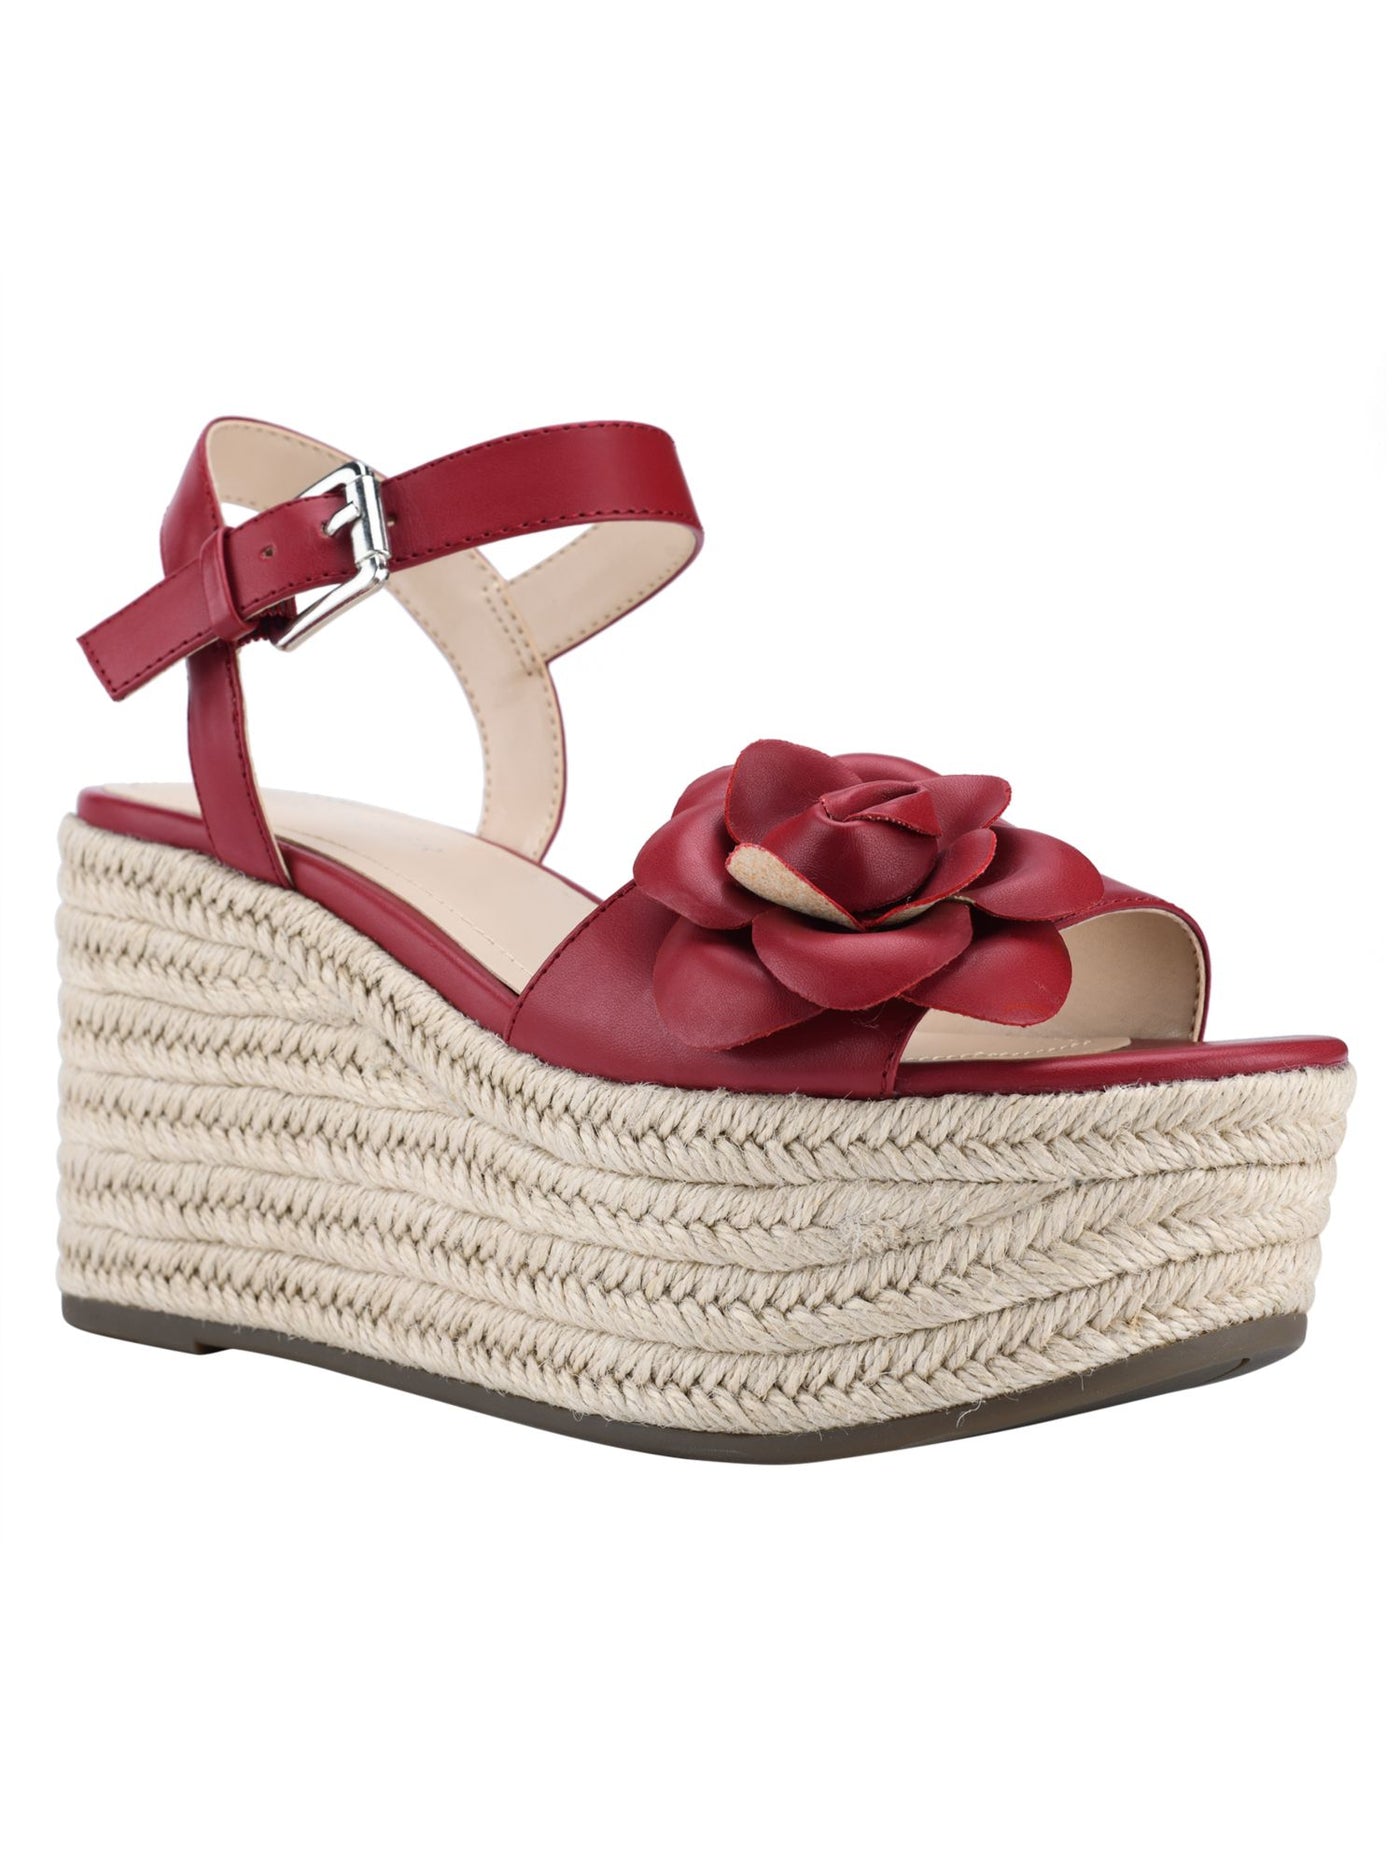 MARC FISHER Womens Red Padded Woven Flower Adjustable Strap Ankle Strap Venom Almond Toe Wedge Buckle Heeled Sandal 11 M